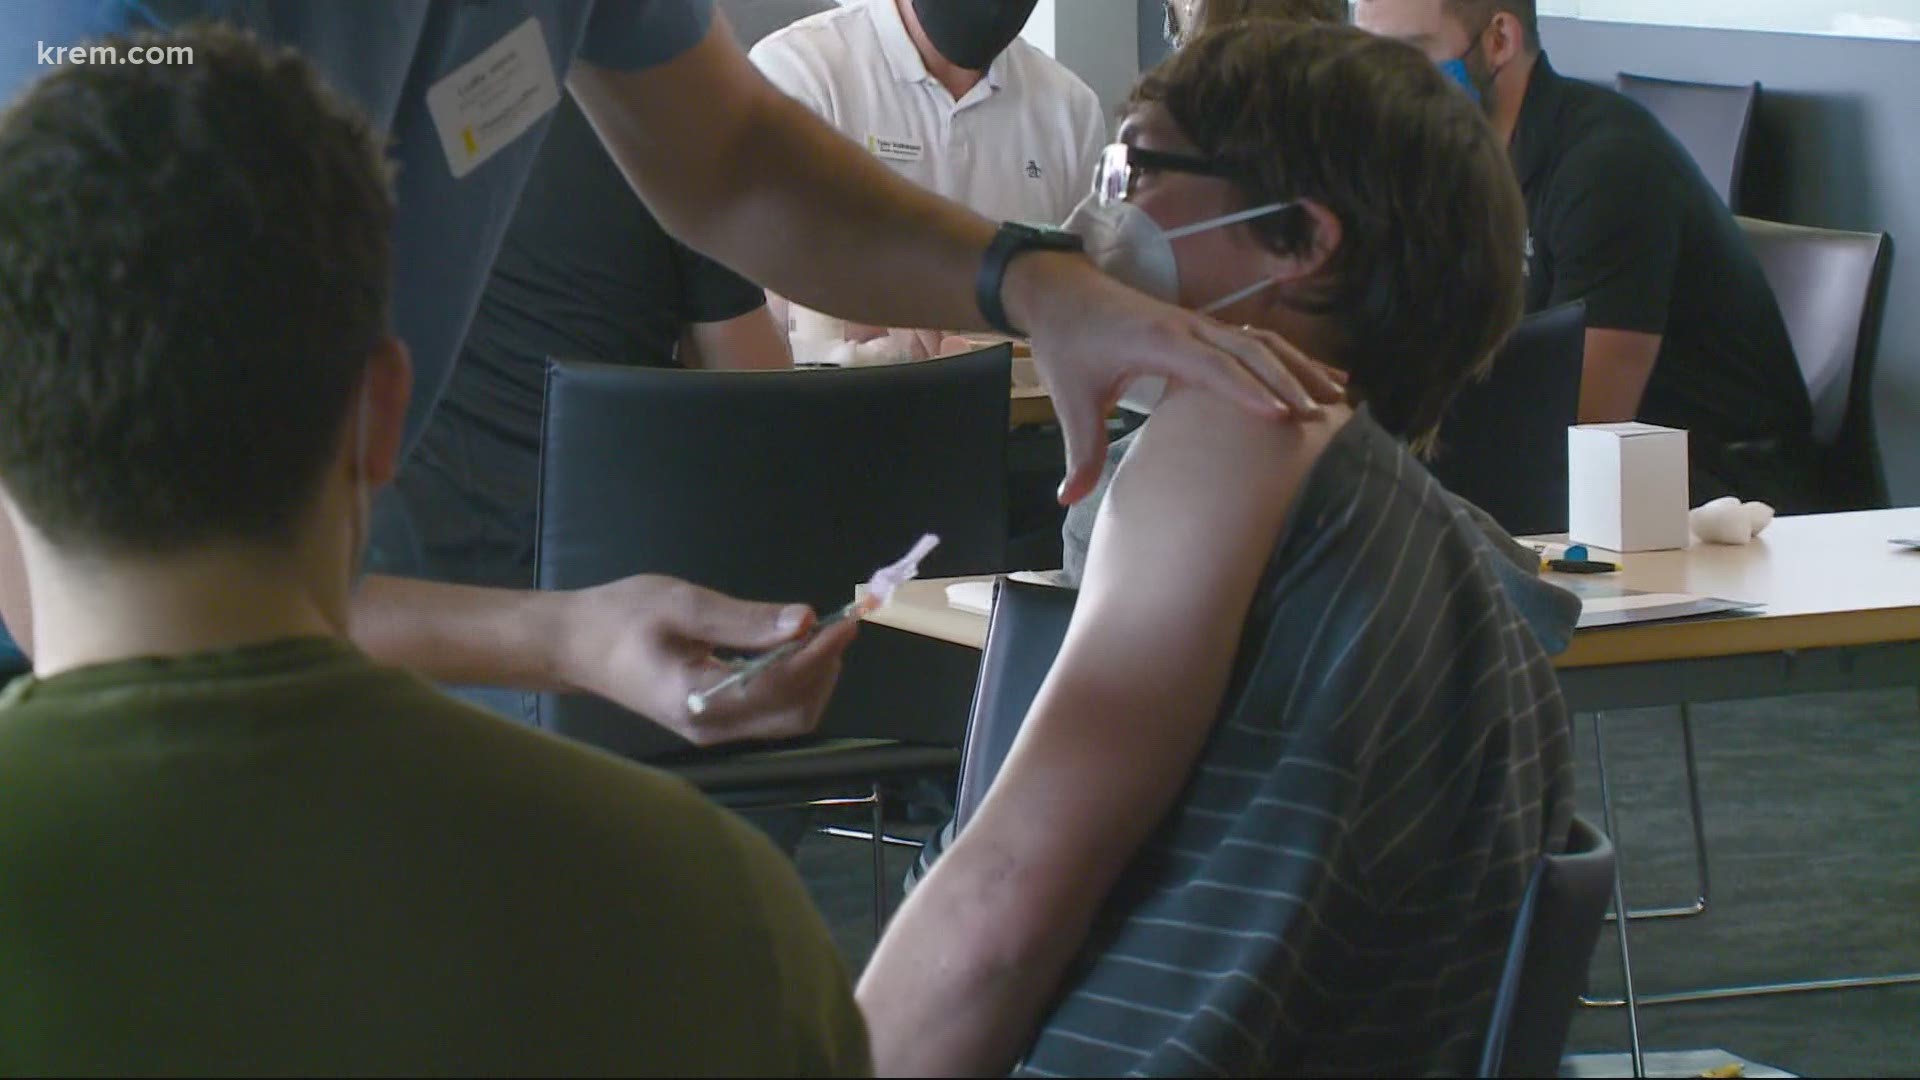 About 40 students were at the University of Idaho Medical Center learning how to administer the shots in people's arms.